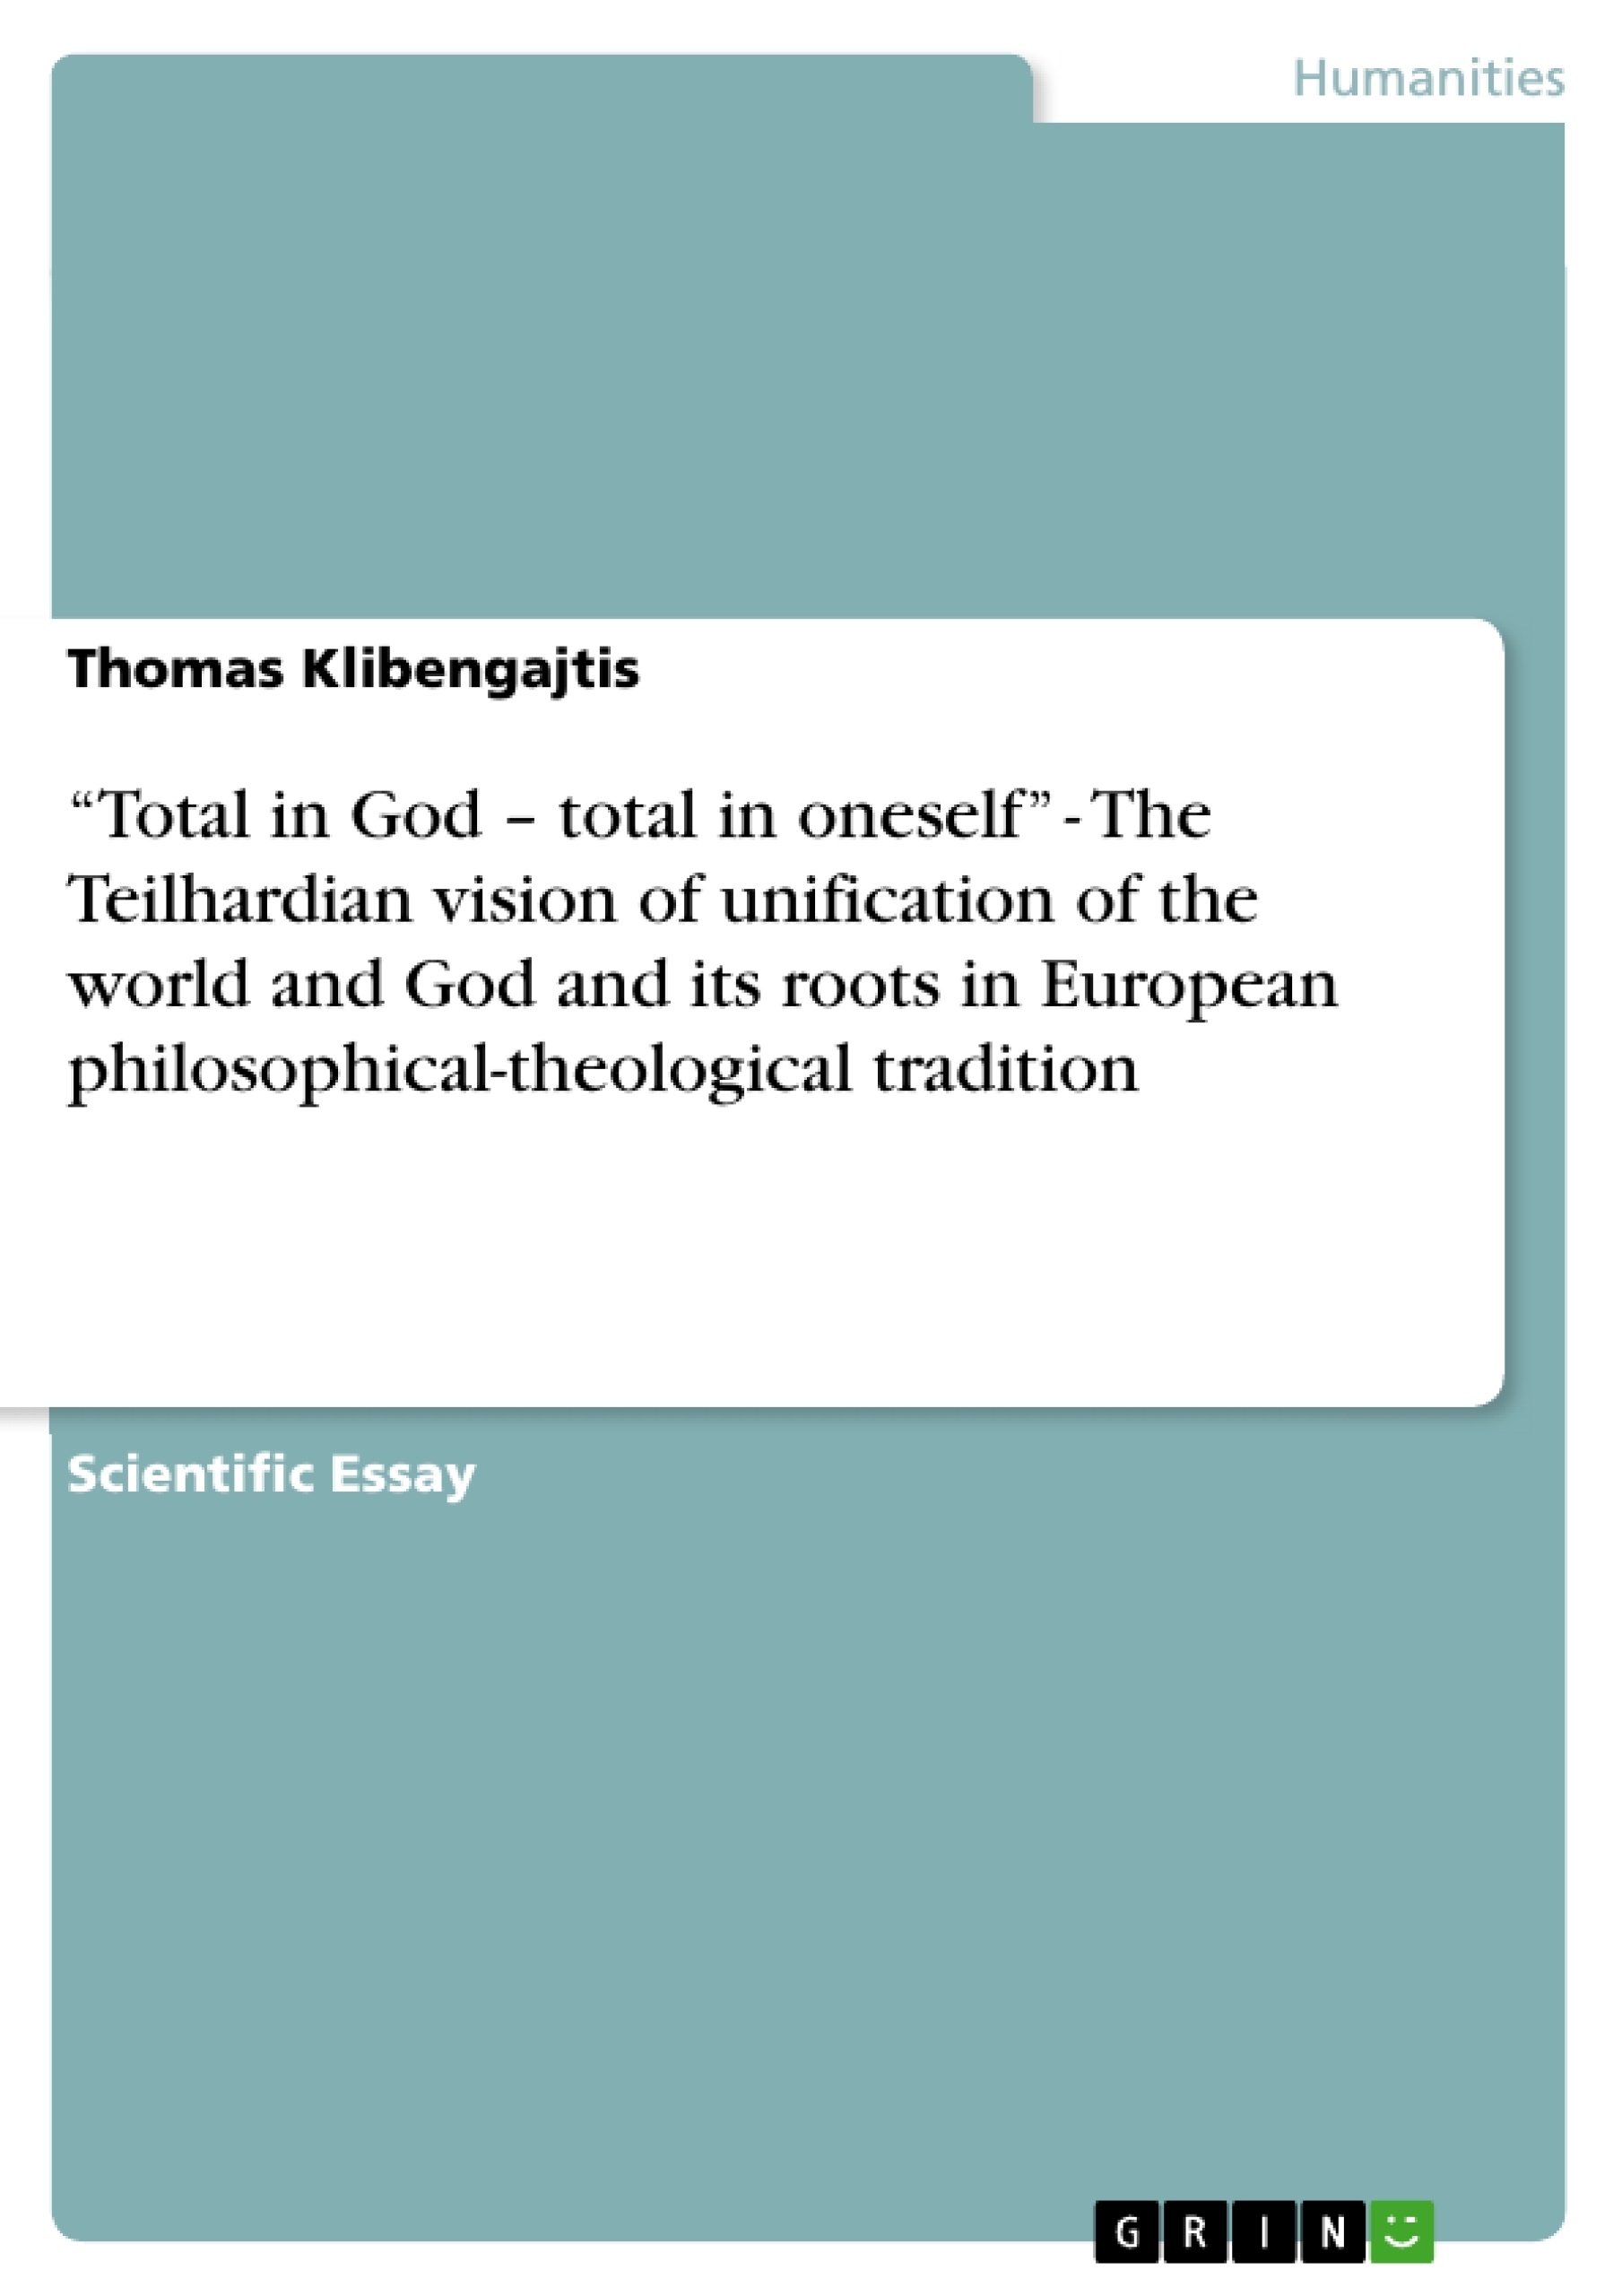 Título: “Total in God – total in oneself” - The Teilhardian vision of unification of the world and God and its roots in European philosophical-theological tradition